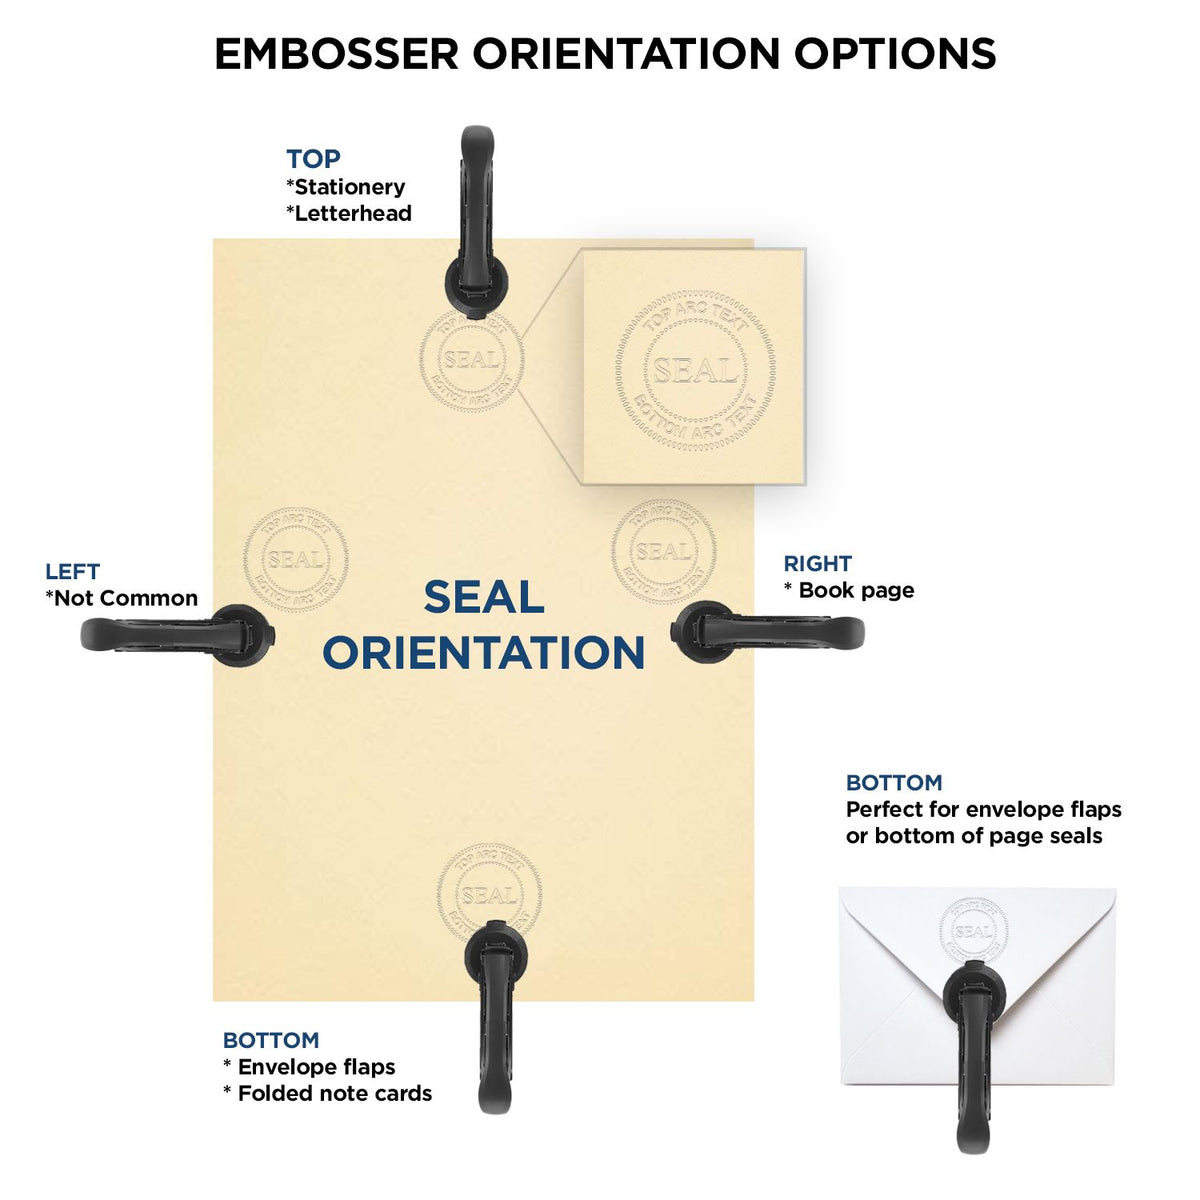 An infographic for the Gift Missouri Engineer Seal showing embosser orientation, this is showing examples of a top, bottom, right and left insert.